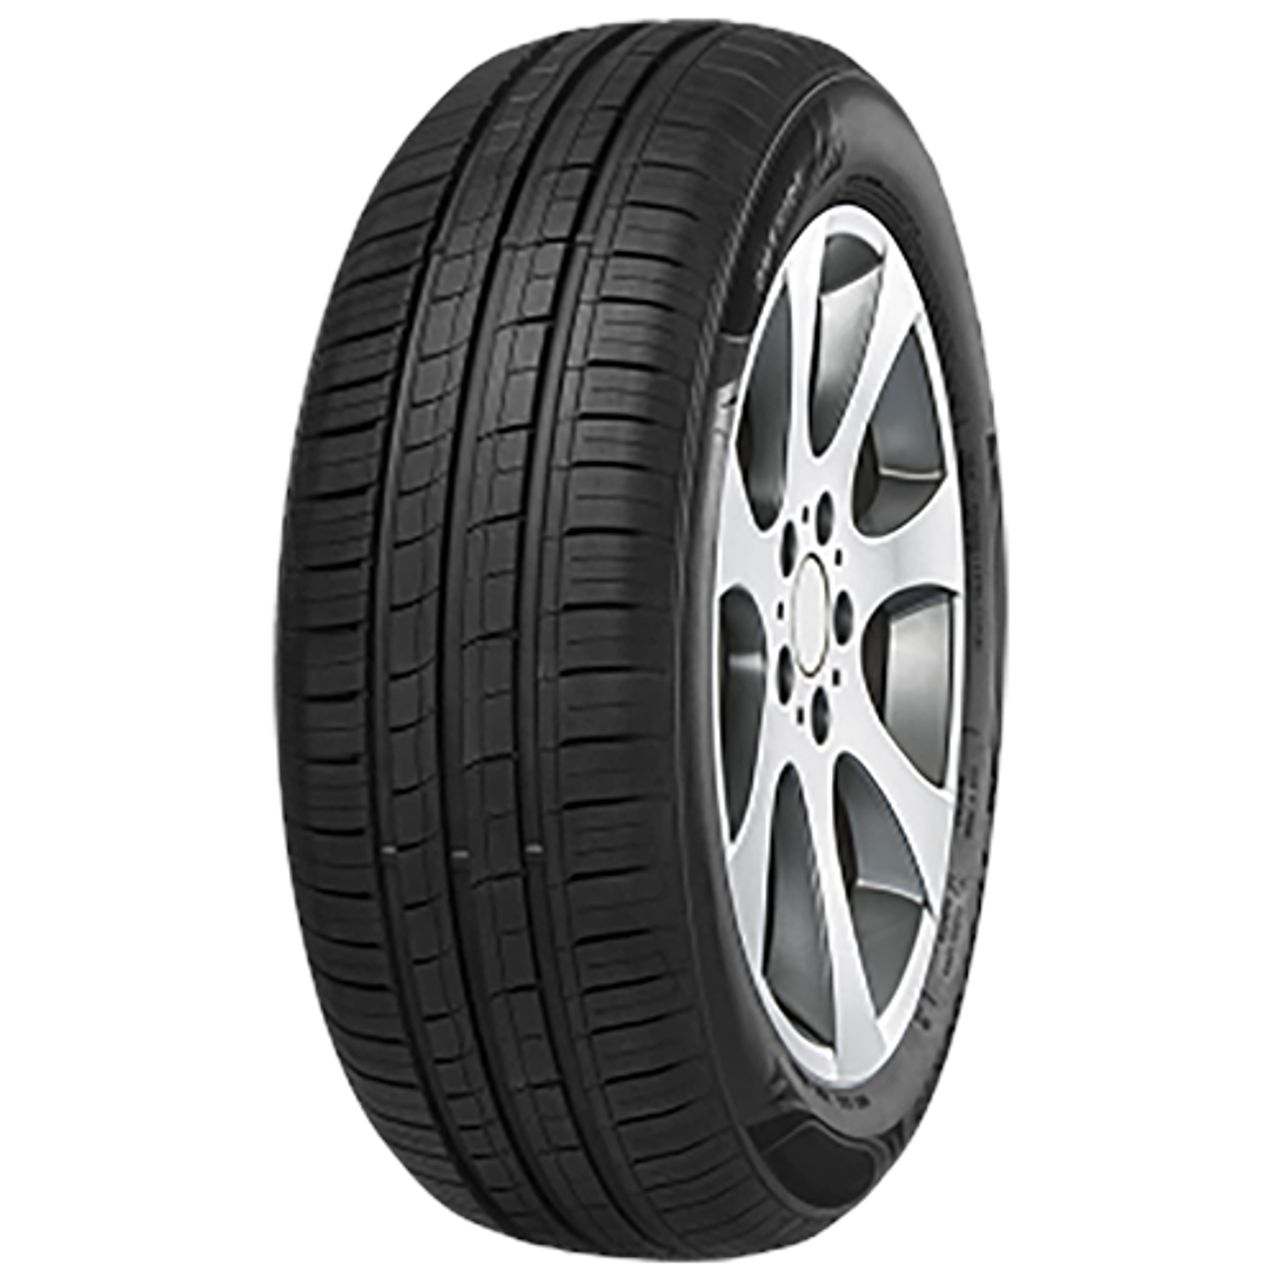 IMPERIAL ECODRIVER 4 155/70R12 73T 